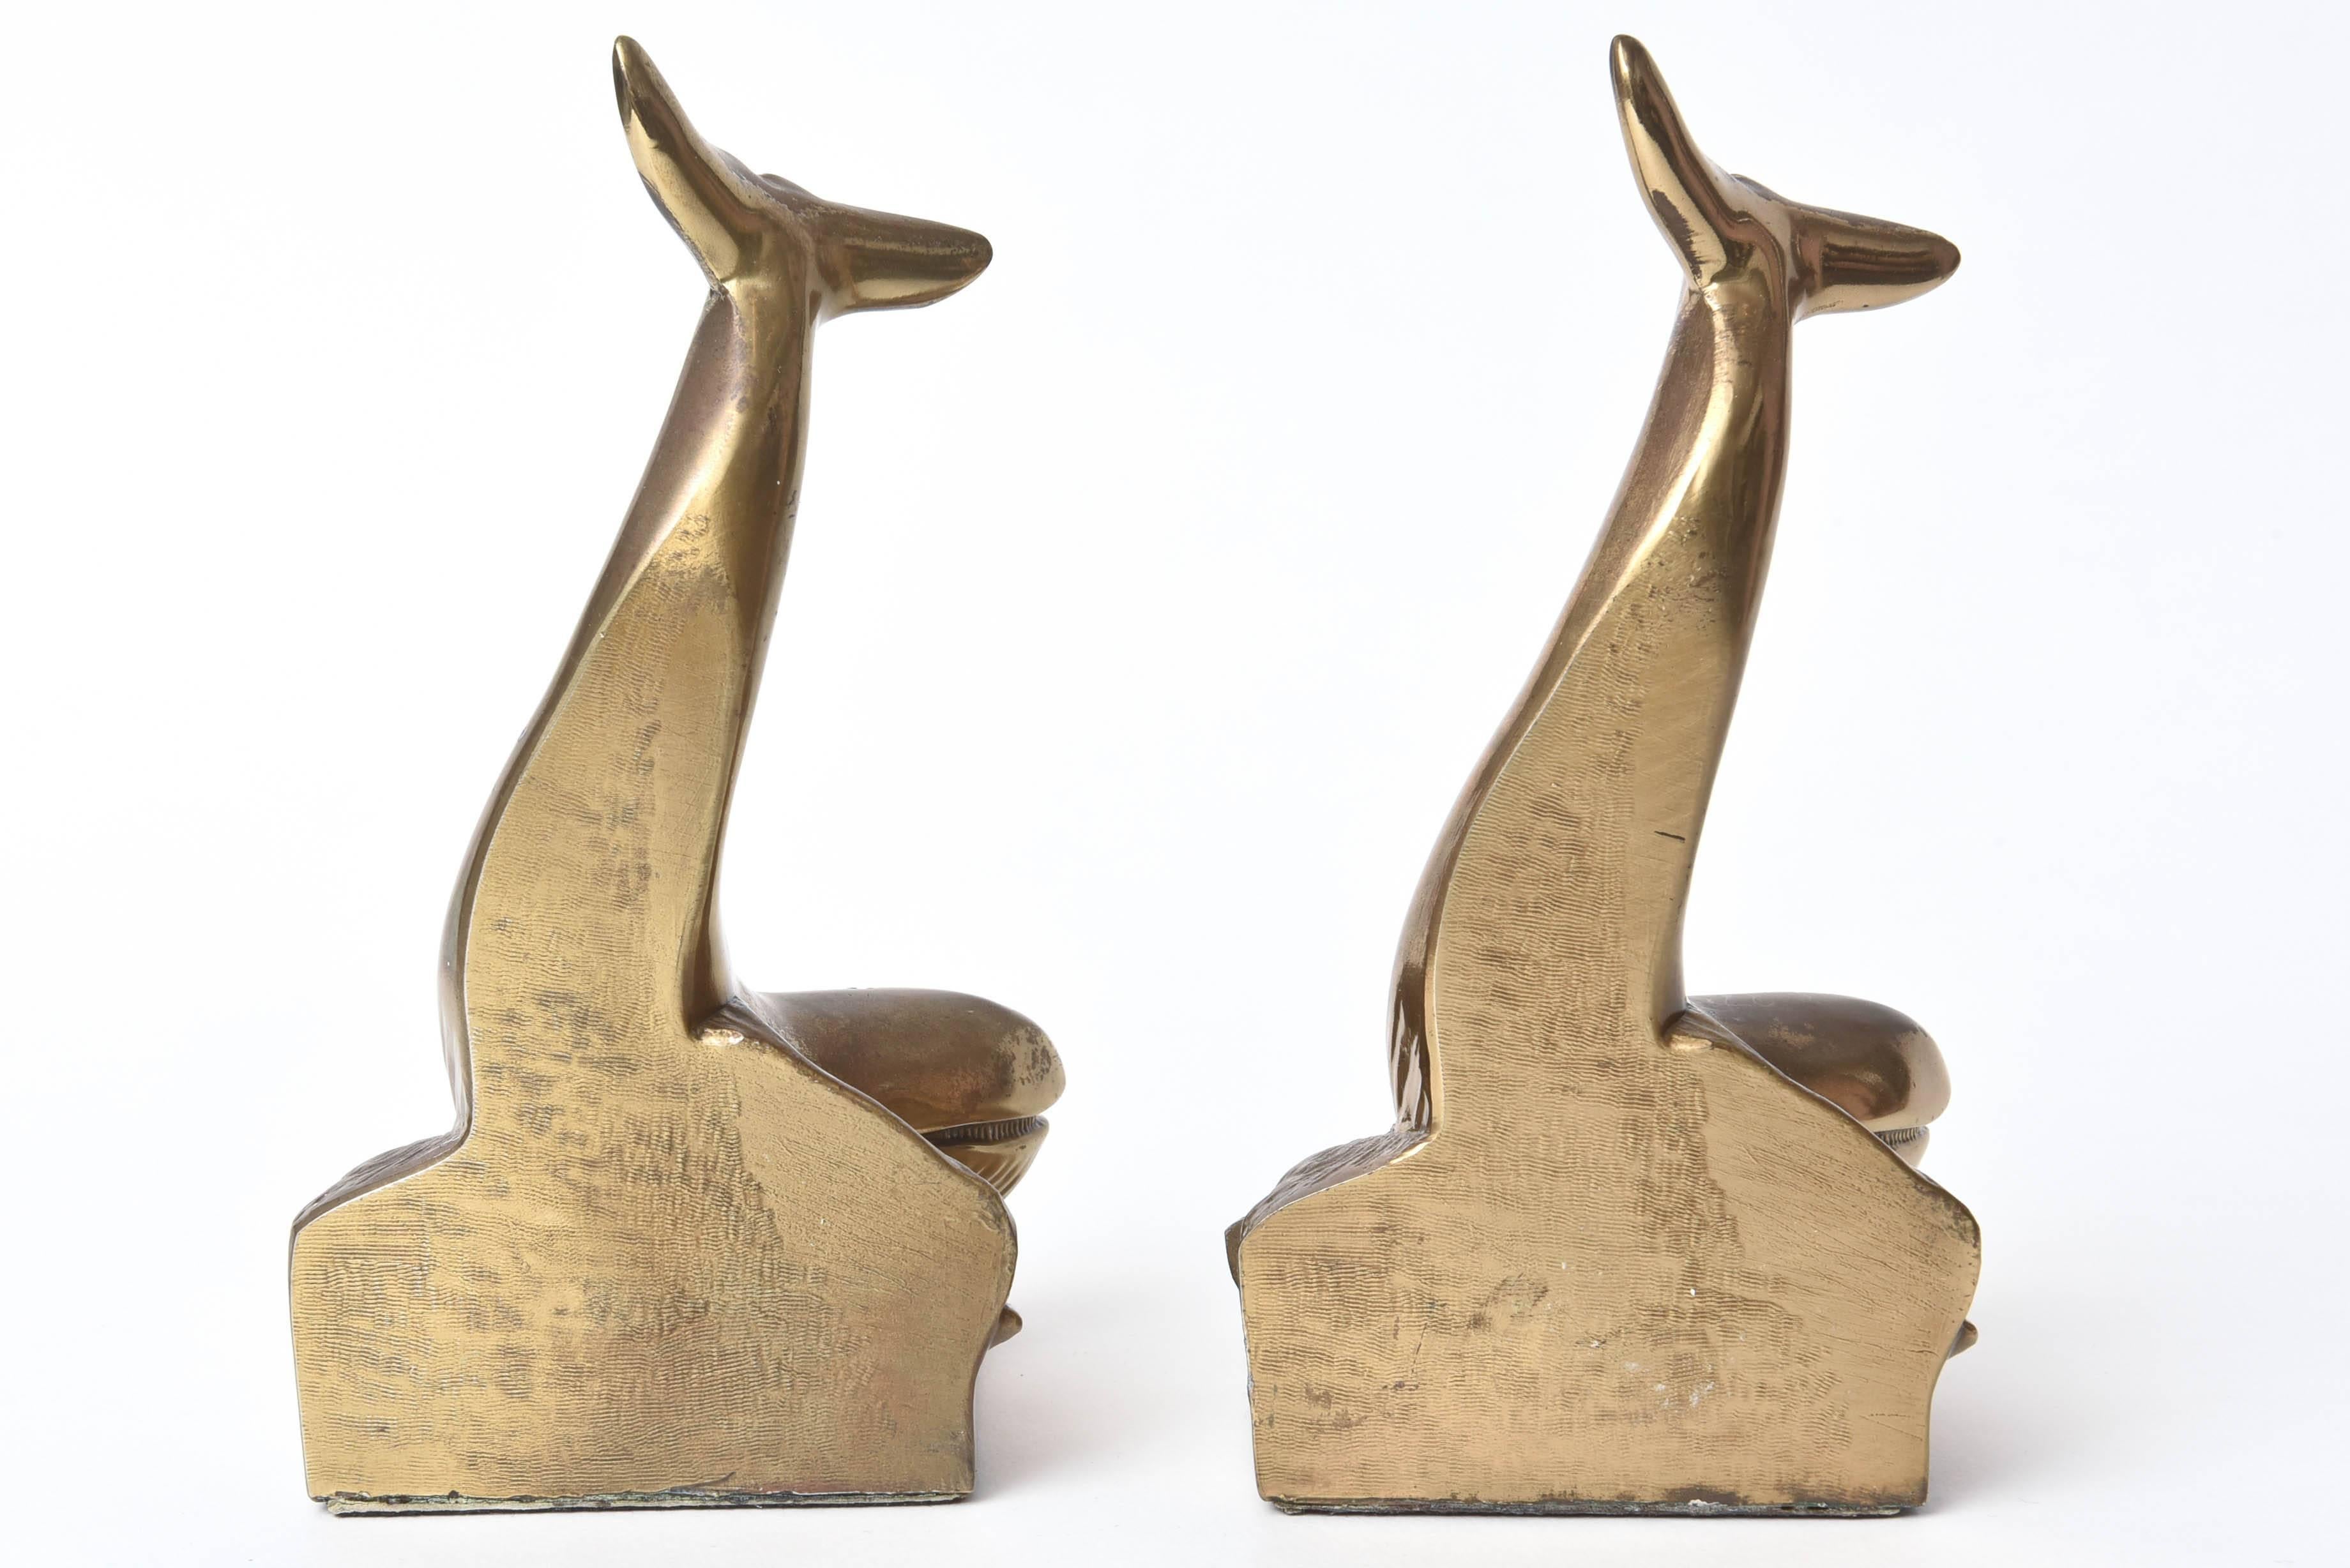 Hand-Crafted Pair of Whale Bookends, Vintage Brass with Great Detail